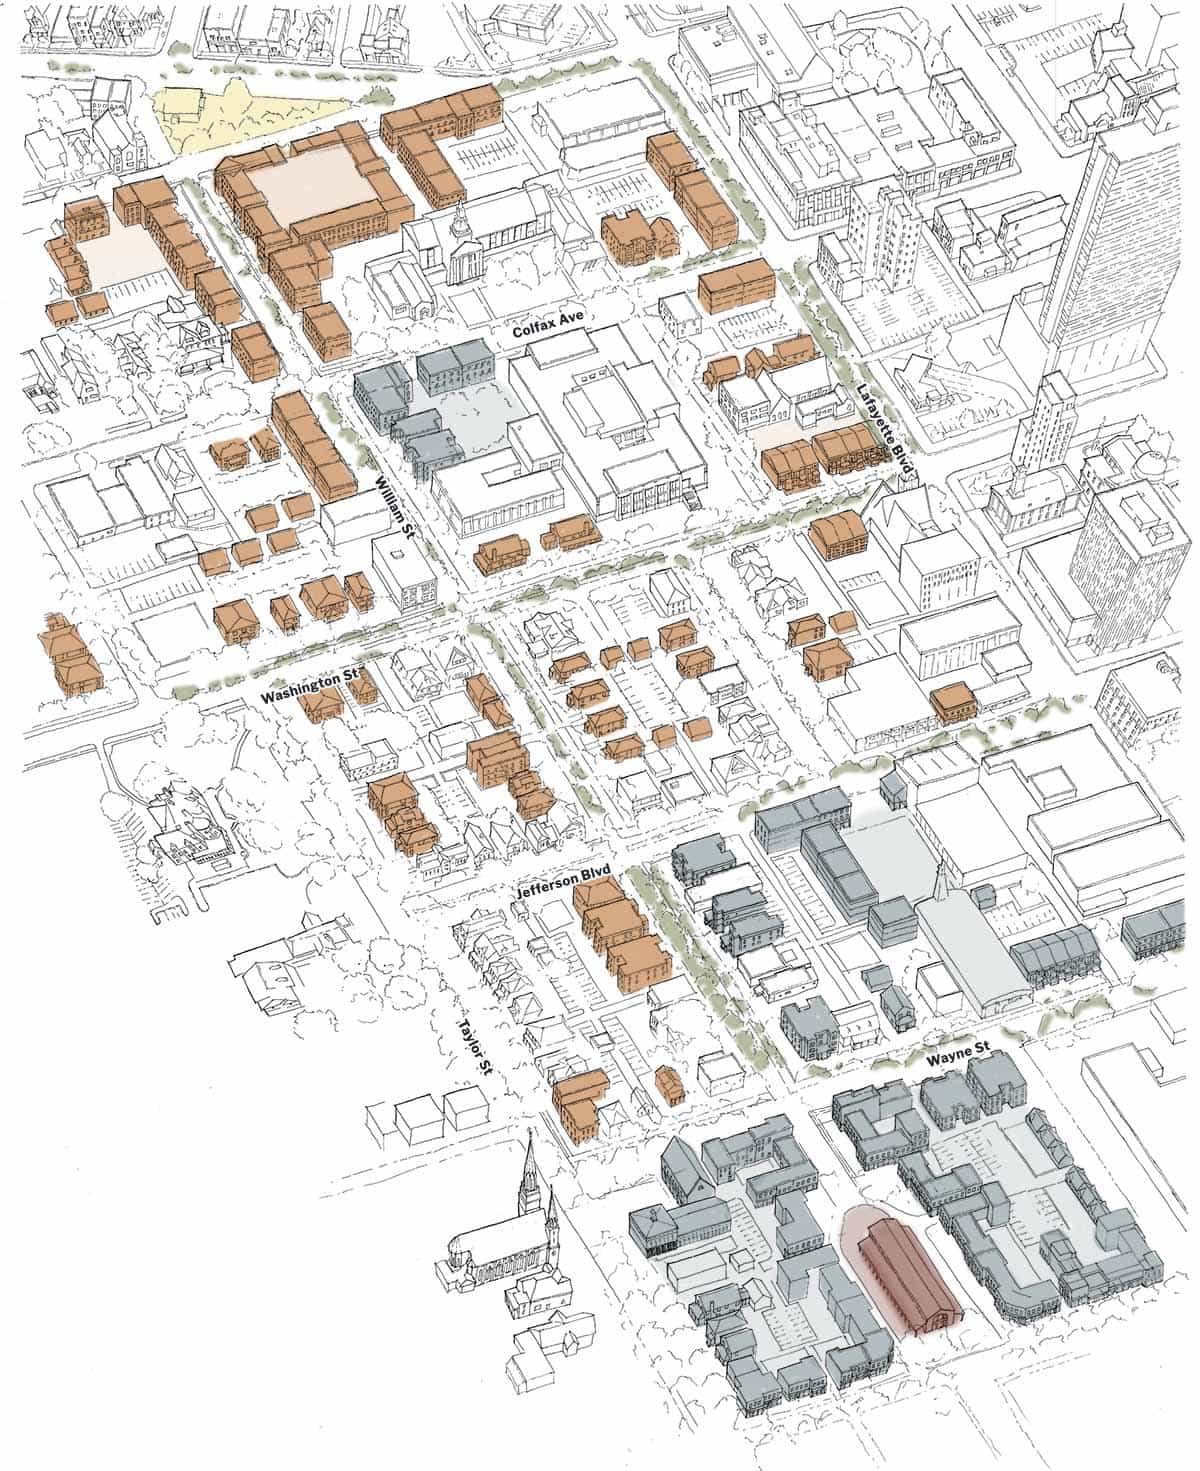 An aerial view drawing of downtown South Bend highlighting several new buildings that fill up old empty lots.